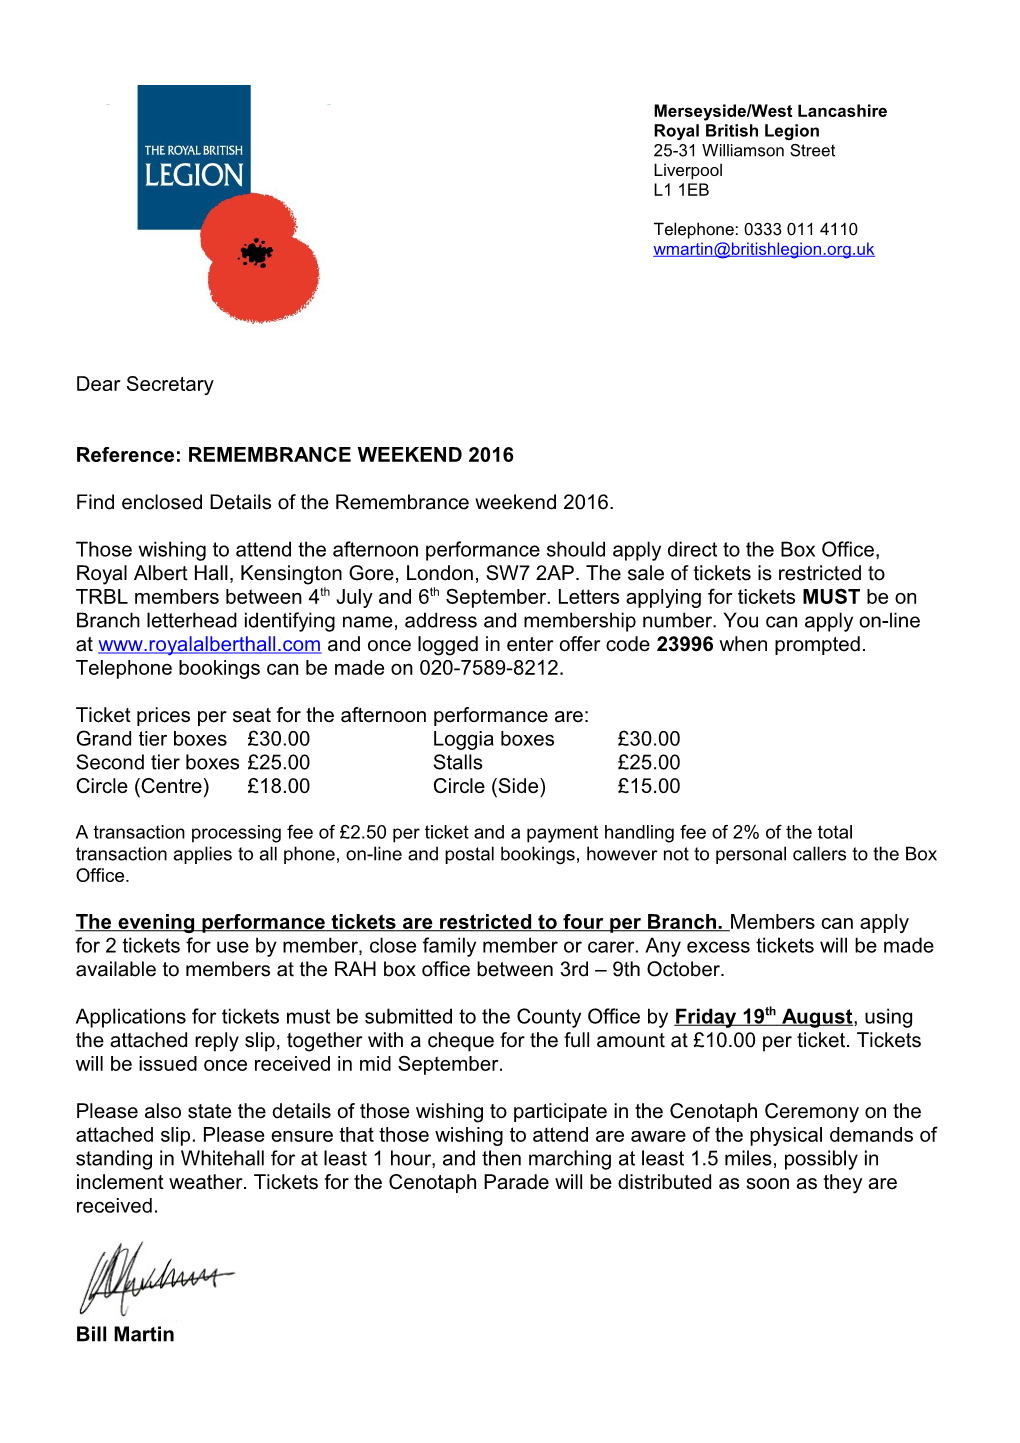 Reference: REMEMBRANCE WEEKEND 2016